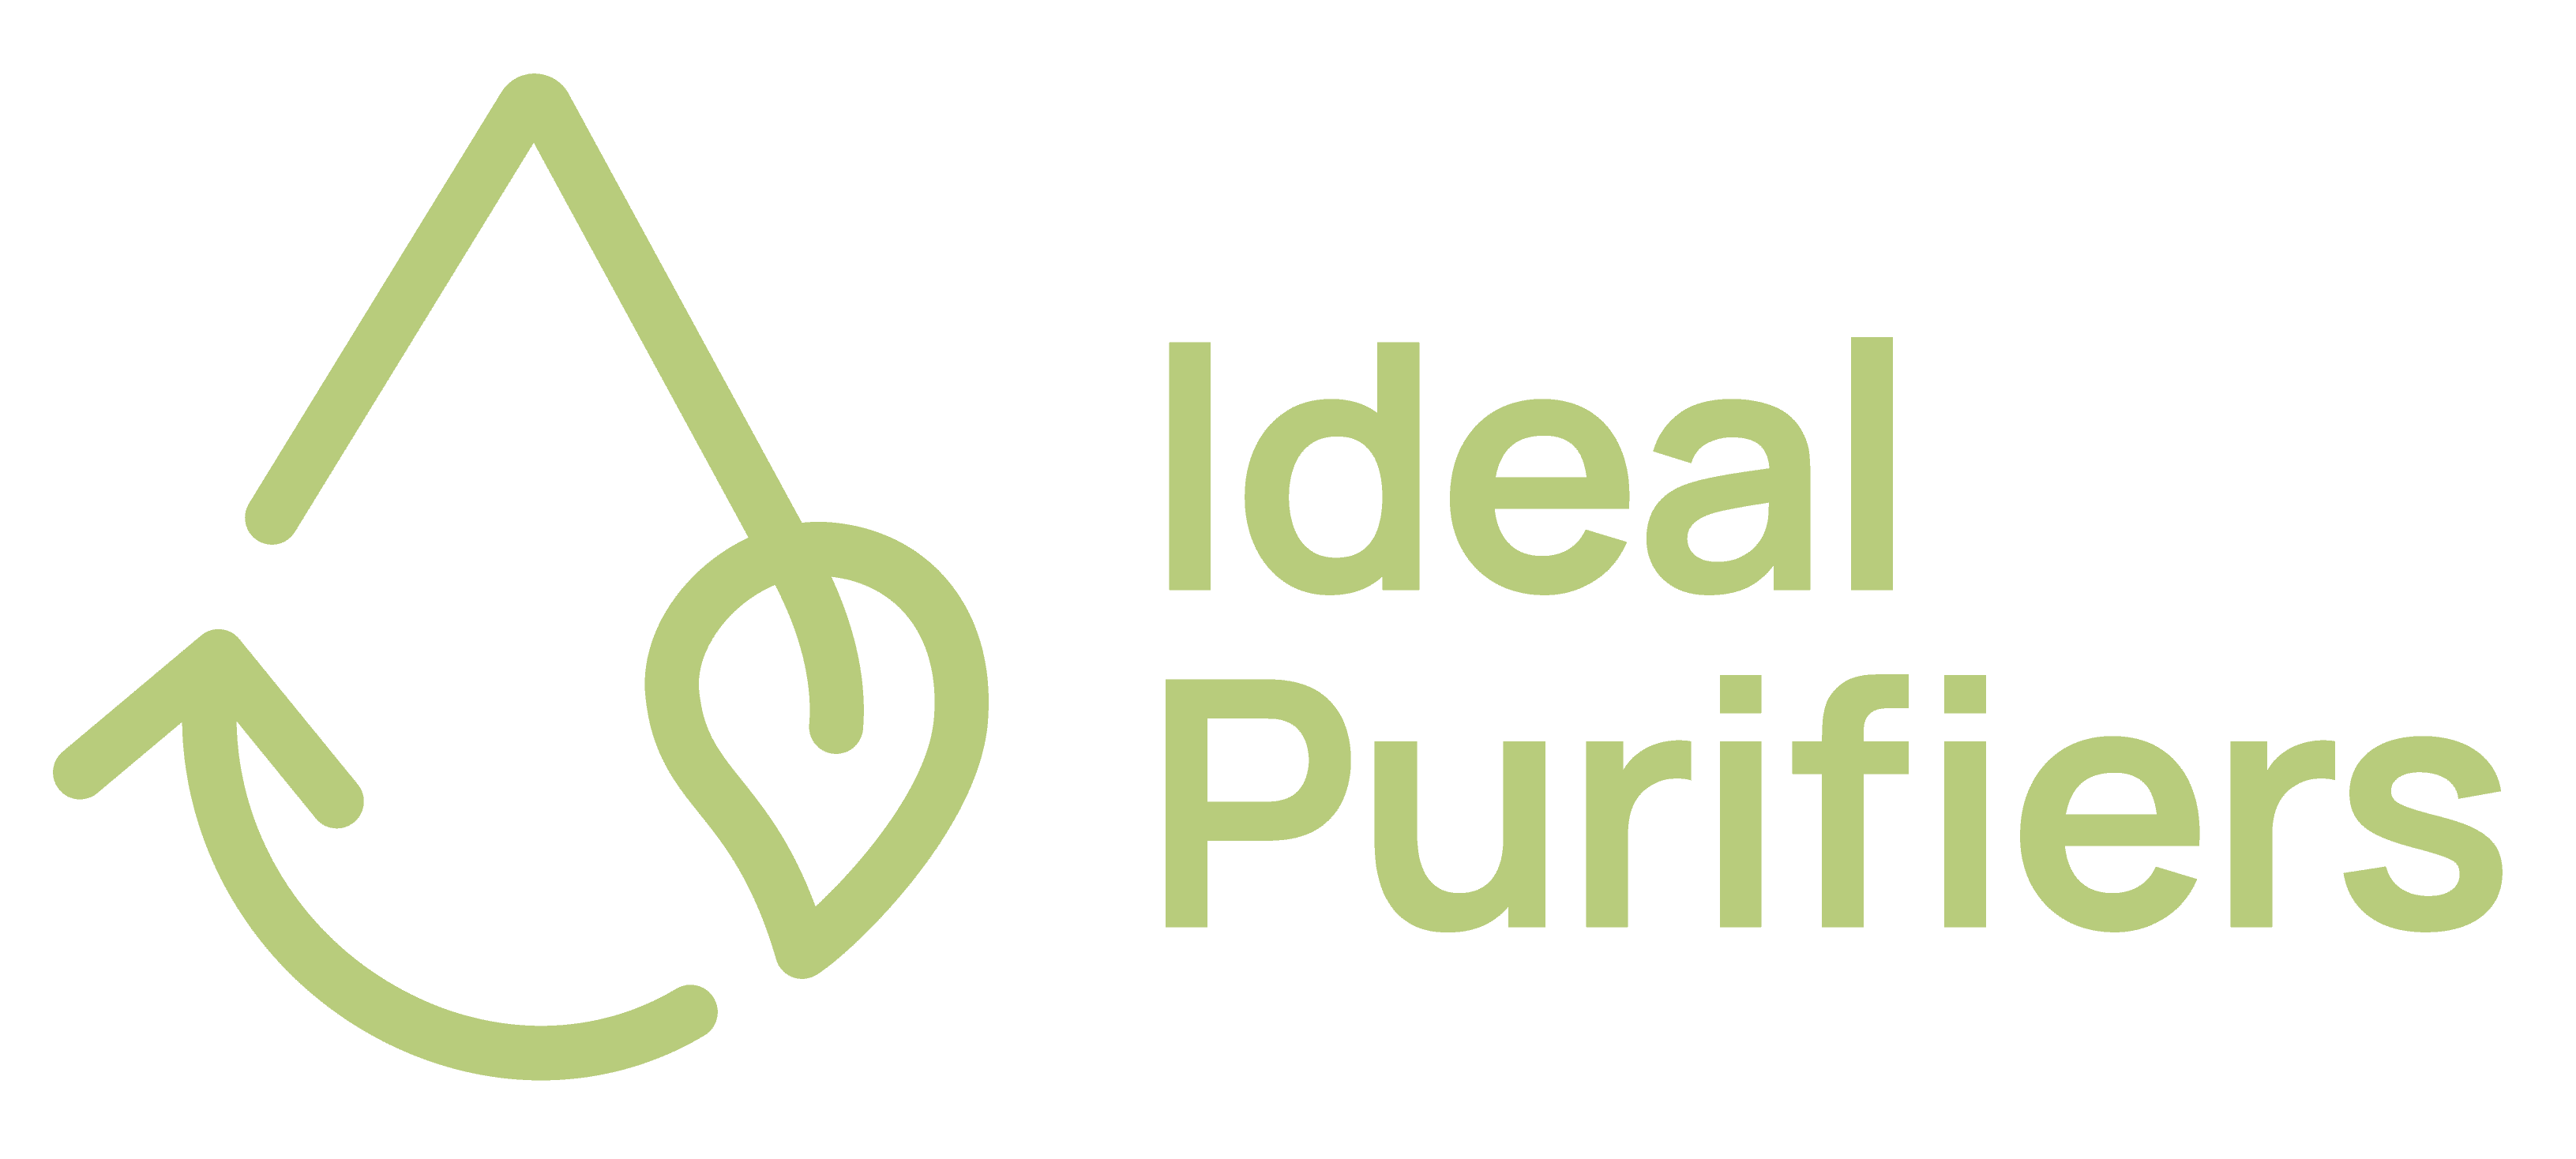 Ideal Purifiers